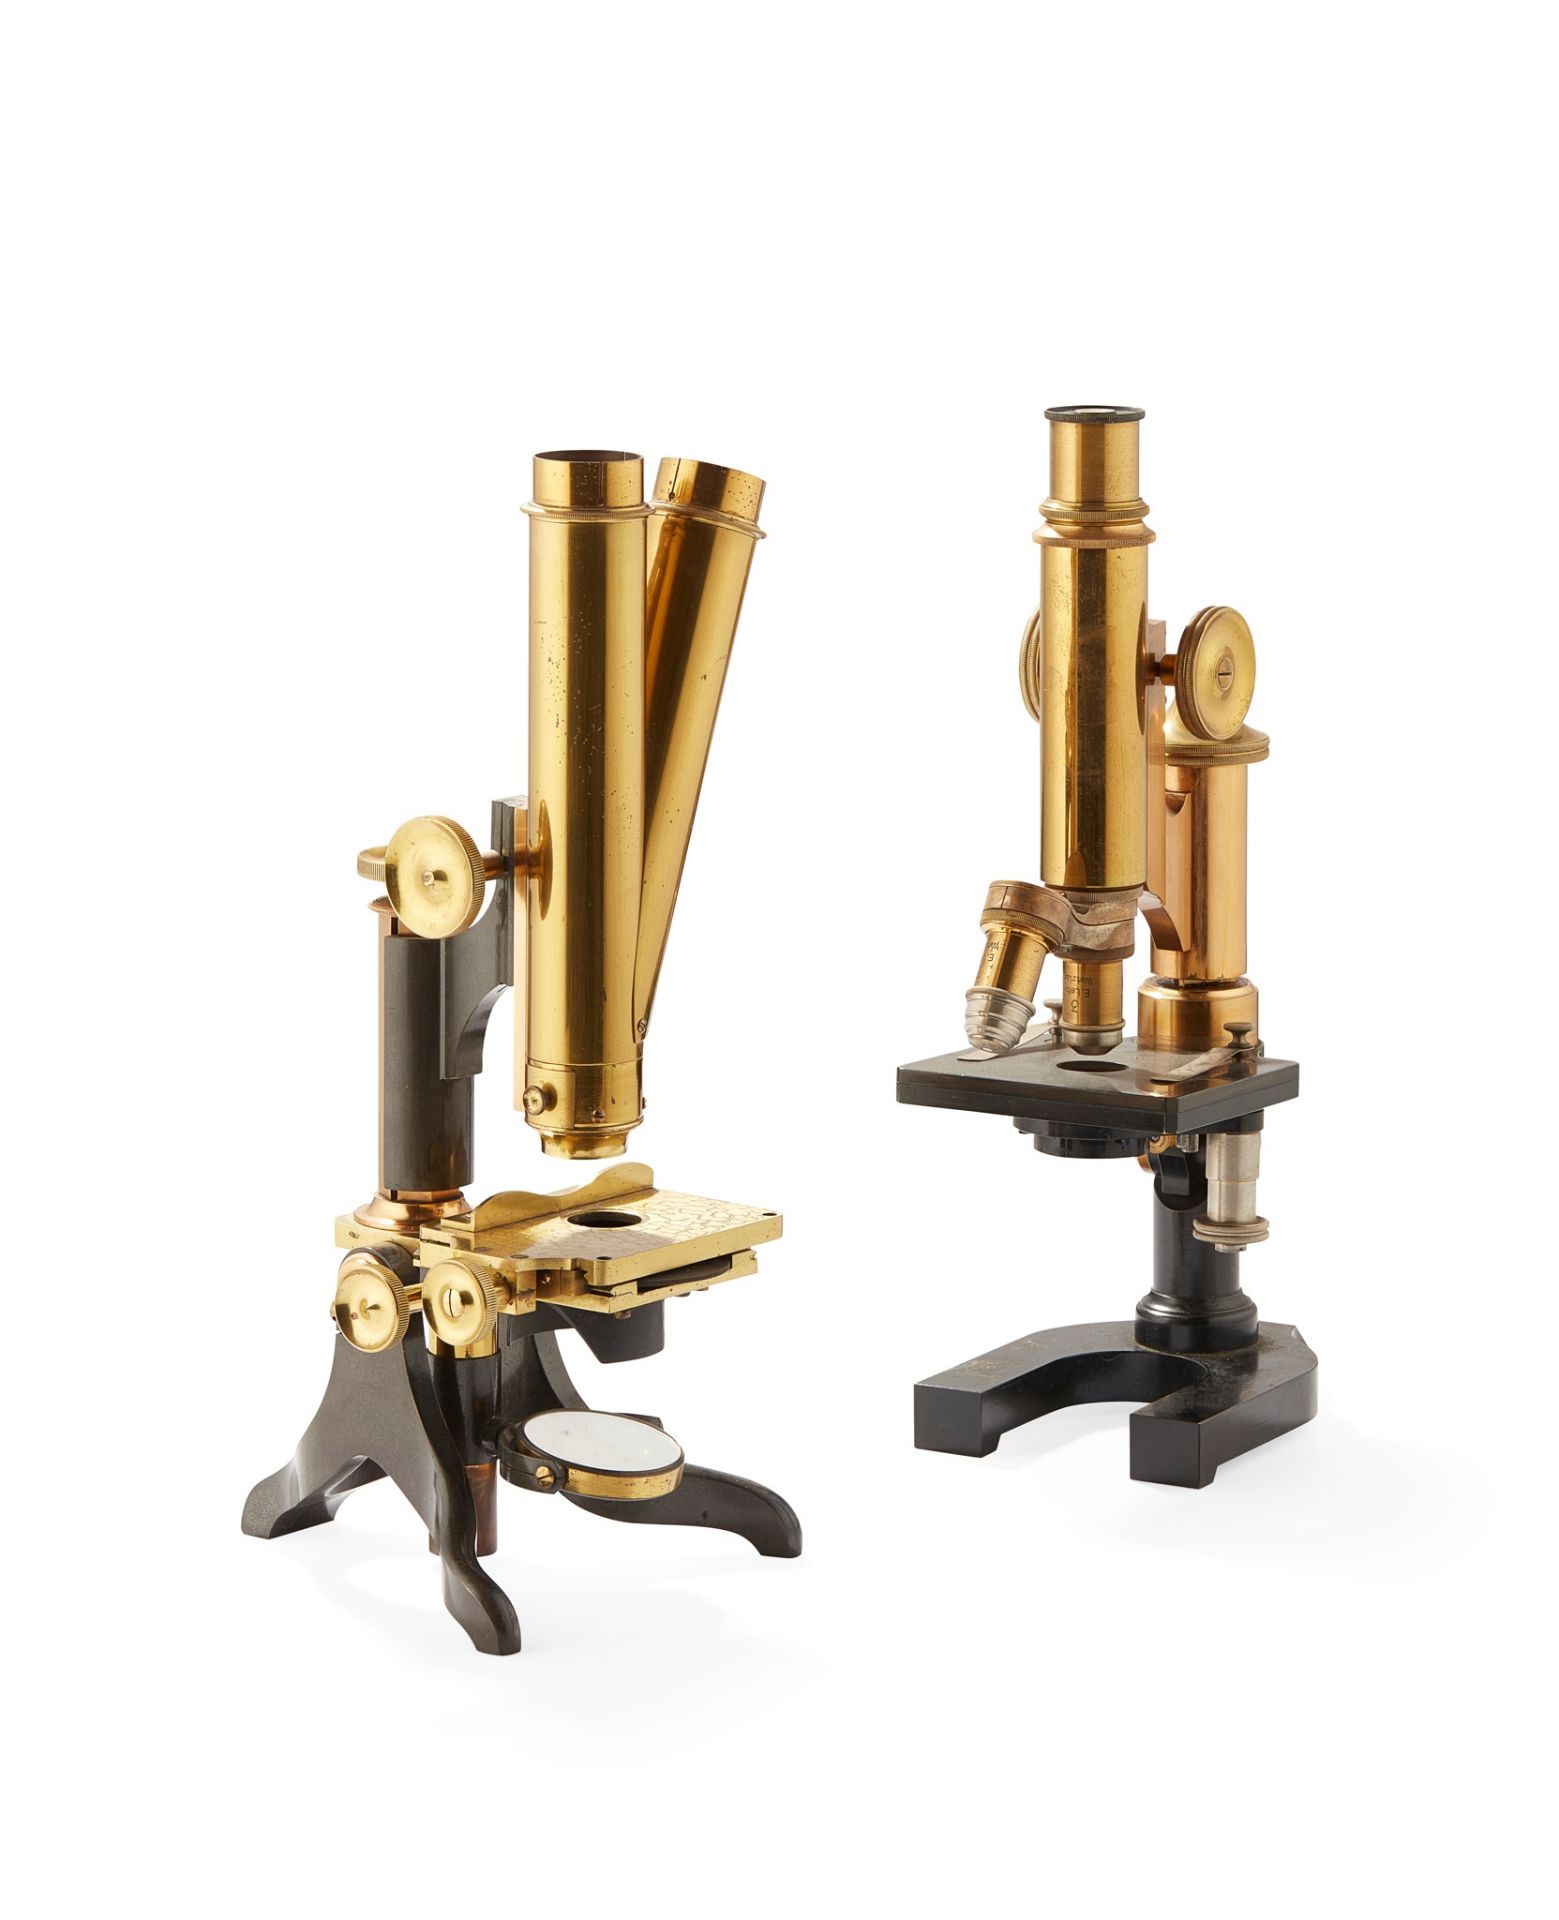 A COMPOUND MONOCULAR MICROSCOPE BY J. BROWN, GLASGOW LATE 19TH CENTURY - Image 2 of 2